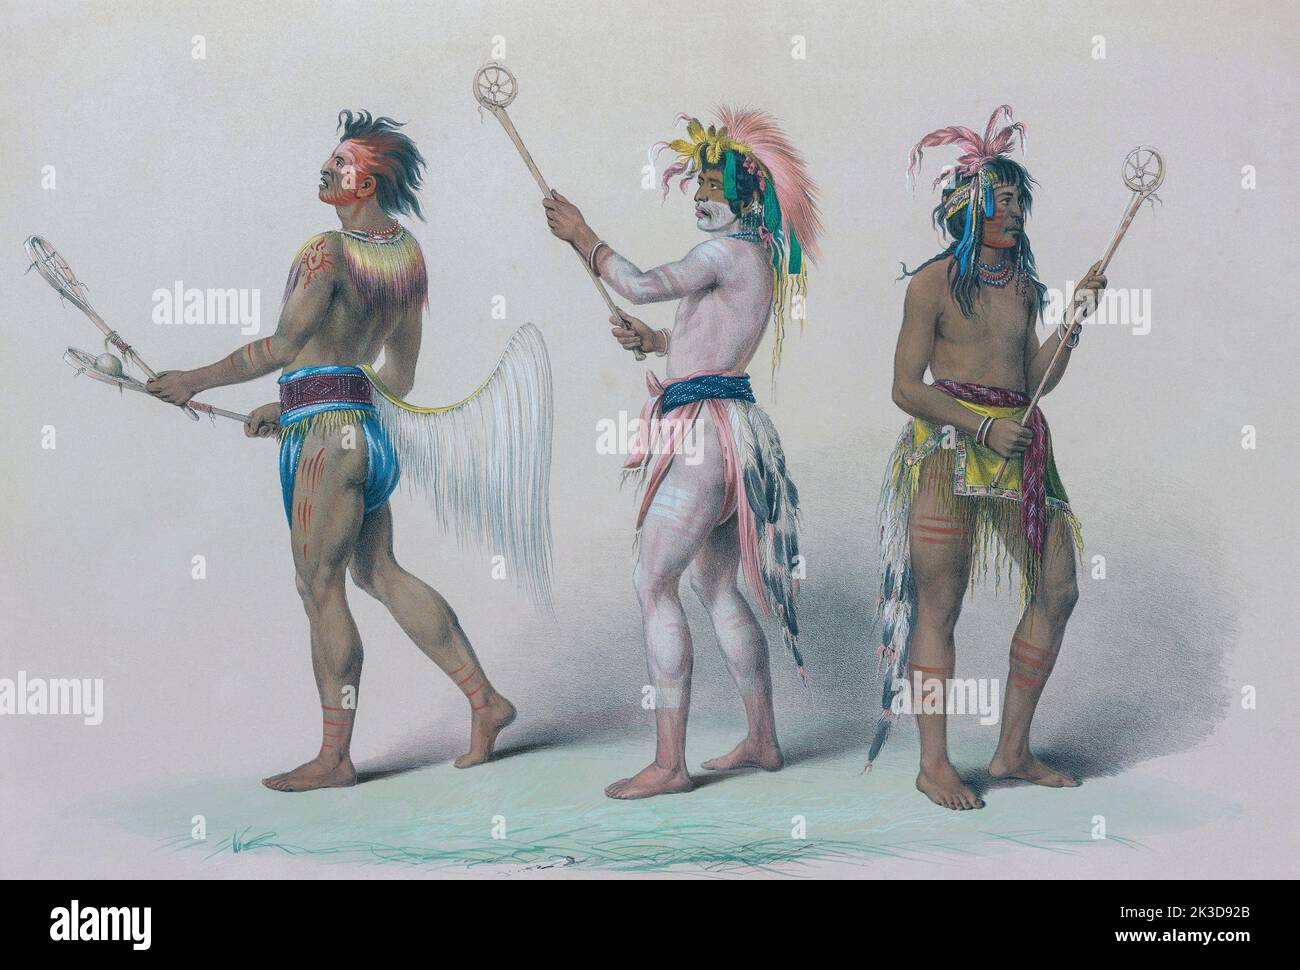 Three ball players.  From the left: A Choctaw;  A Sioux from the Upper Mississippi;  A Sioux from the Missouri.  From Catlin's North American Indian Portfolio, published in London 1844 by the artist, American adventurer George Catlin, 1796 - 1872.  During many journeys Catlin recorded with pen and brush the customs and life-styles of Native American tribes. Stock Photo